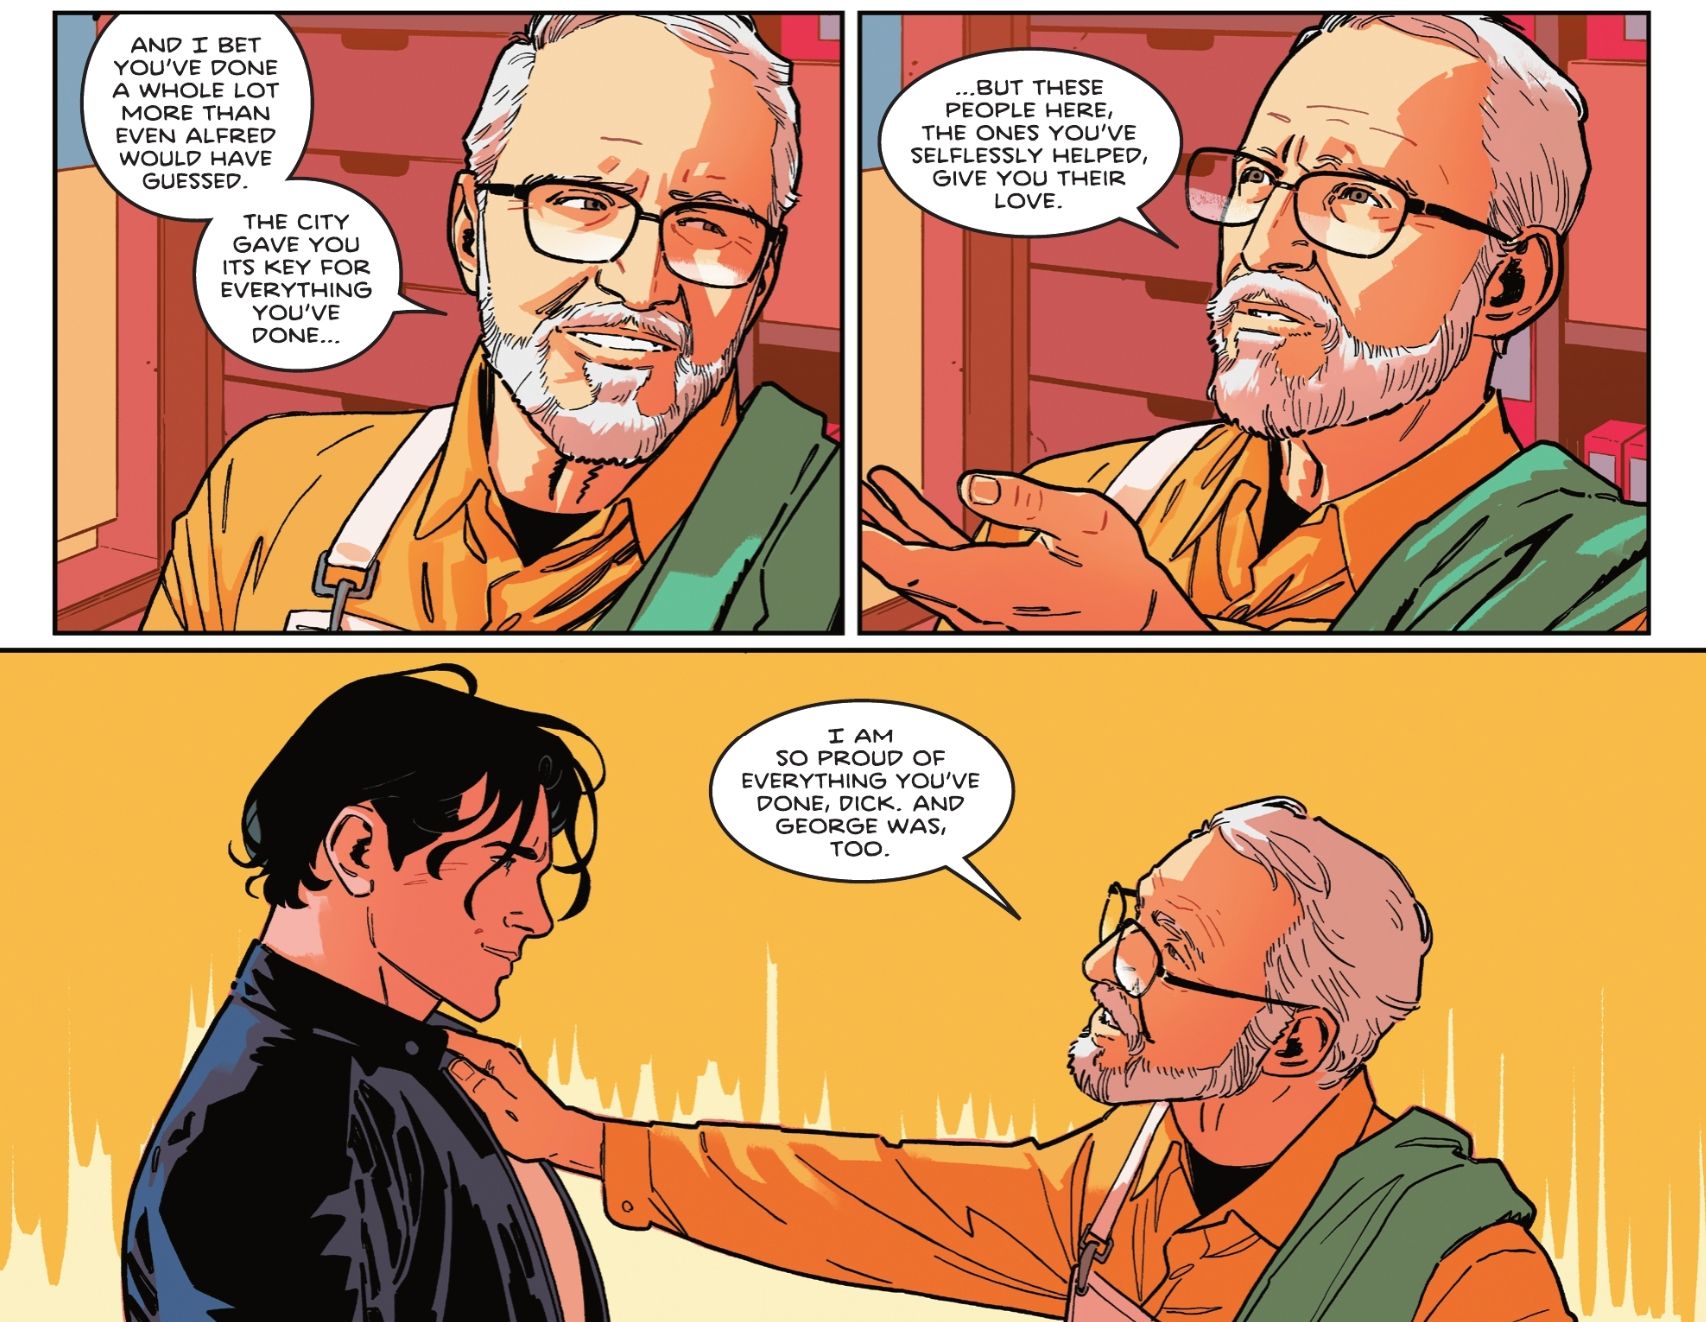 Nightwing Honors Iconic DC Creators in Heart-Warming Tribute